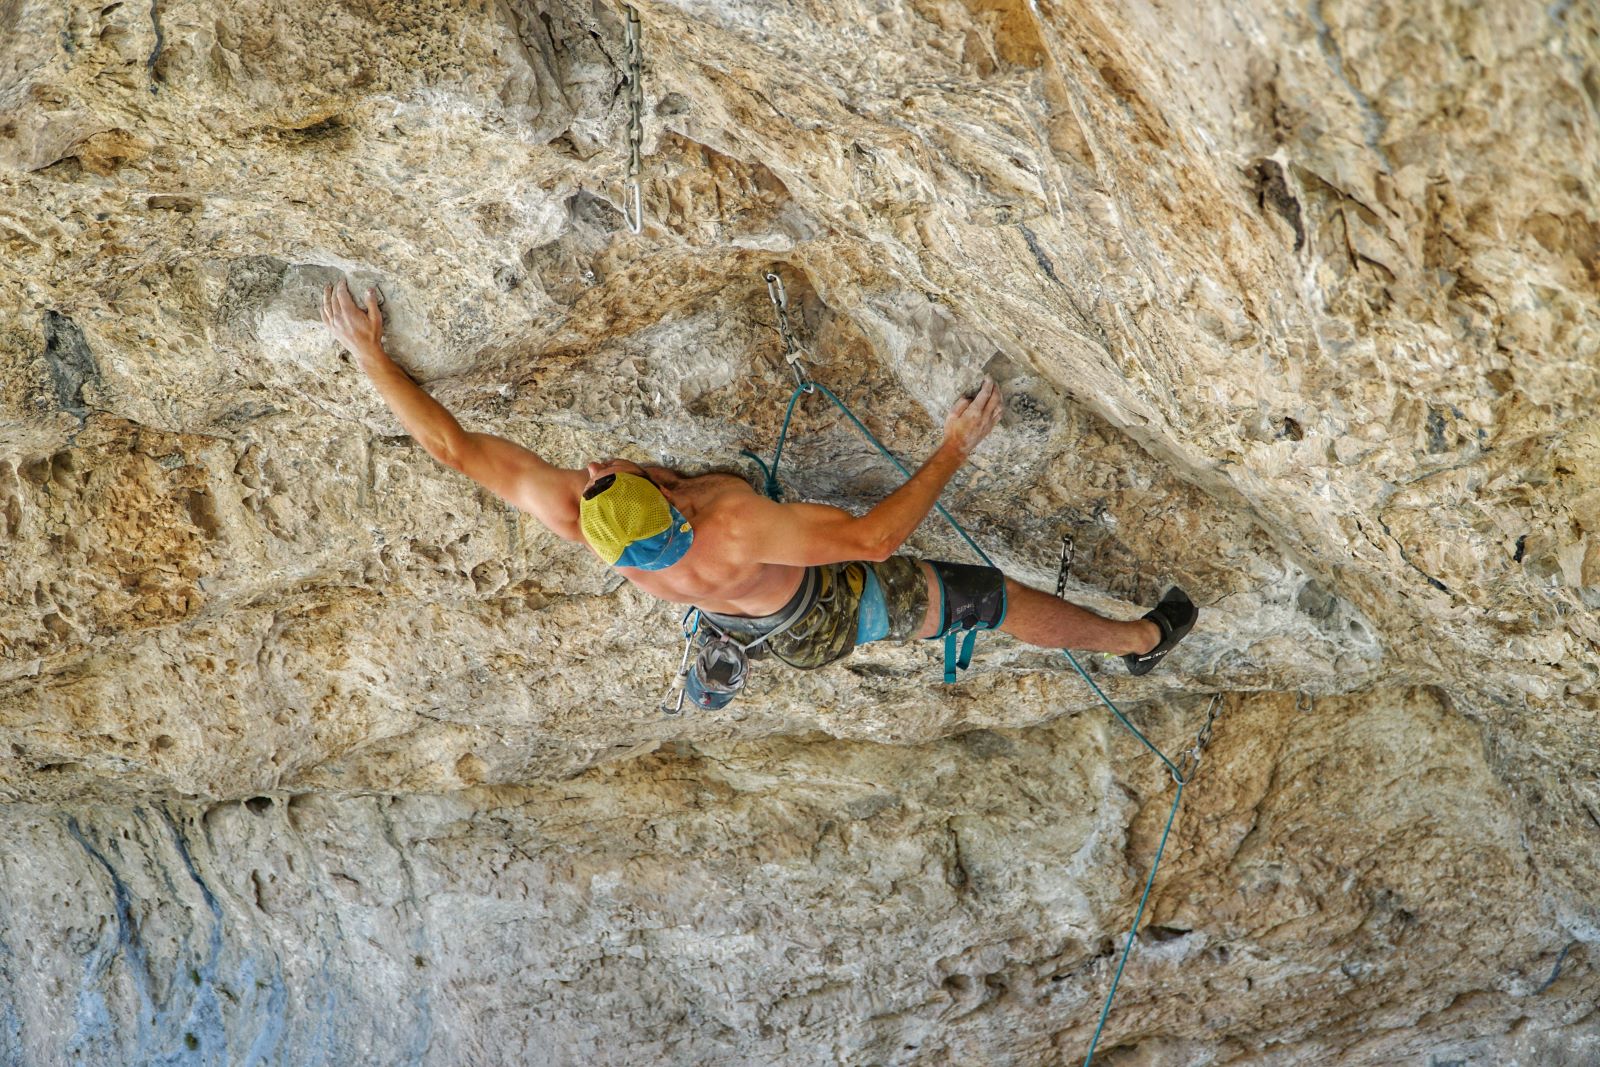 Weekend Warrior climbs first 5.14 and earns a spot on the USA Ice Climbing Team!